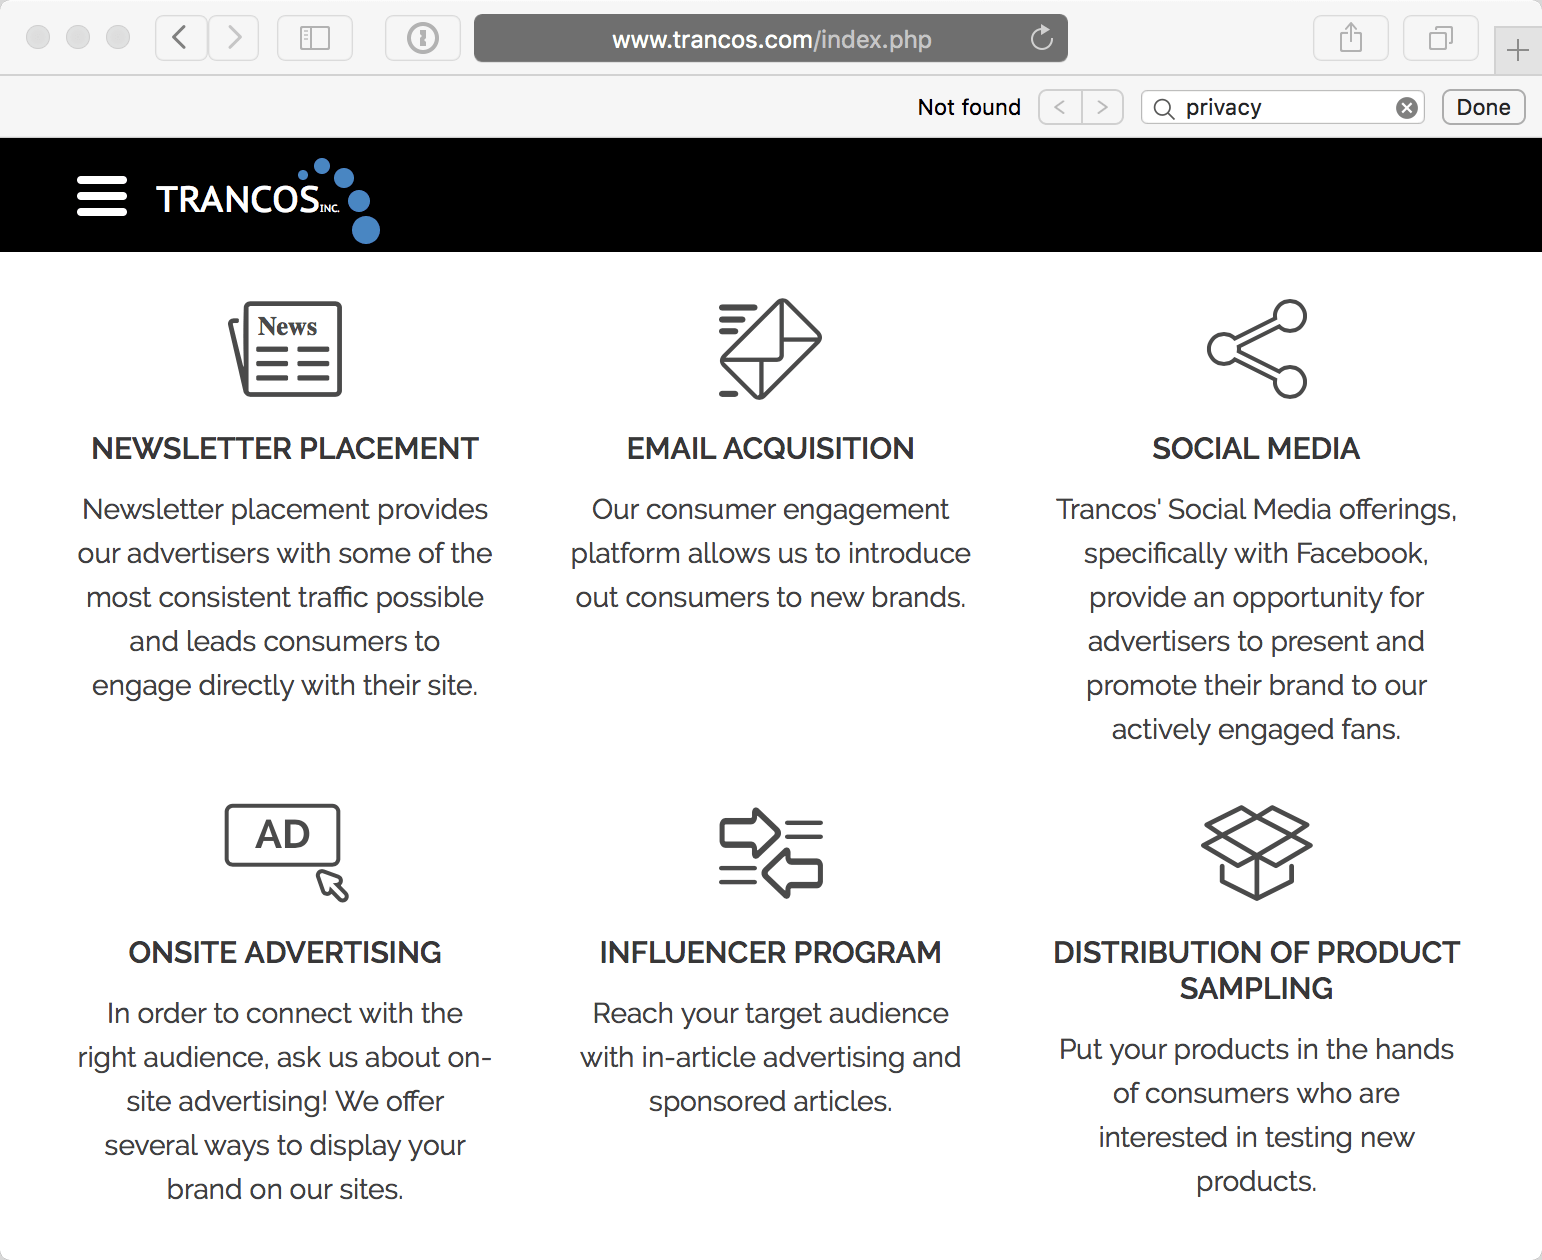 Trancos engages in newsletter placement, email acquisition, social media, onsite advertising, influencer programs, and distribution of product sampling.